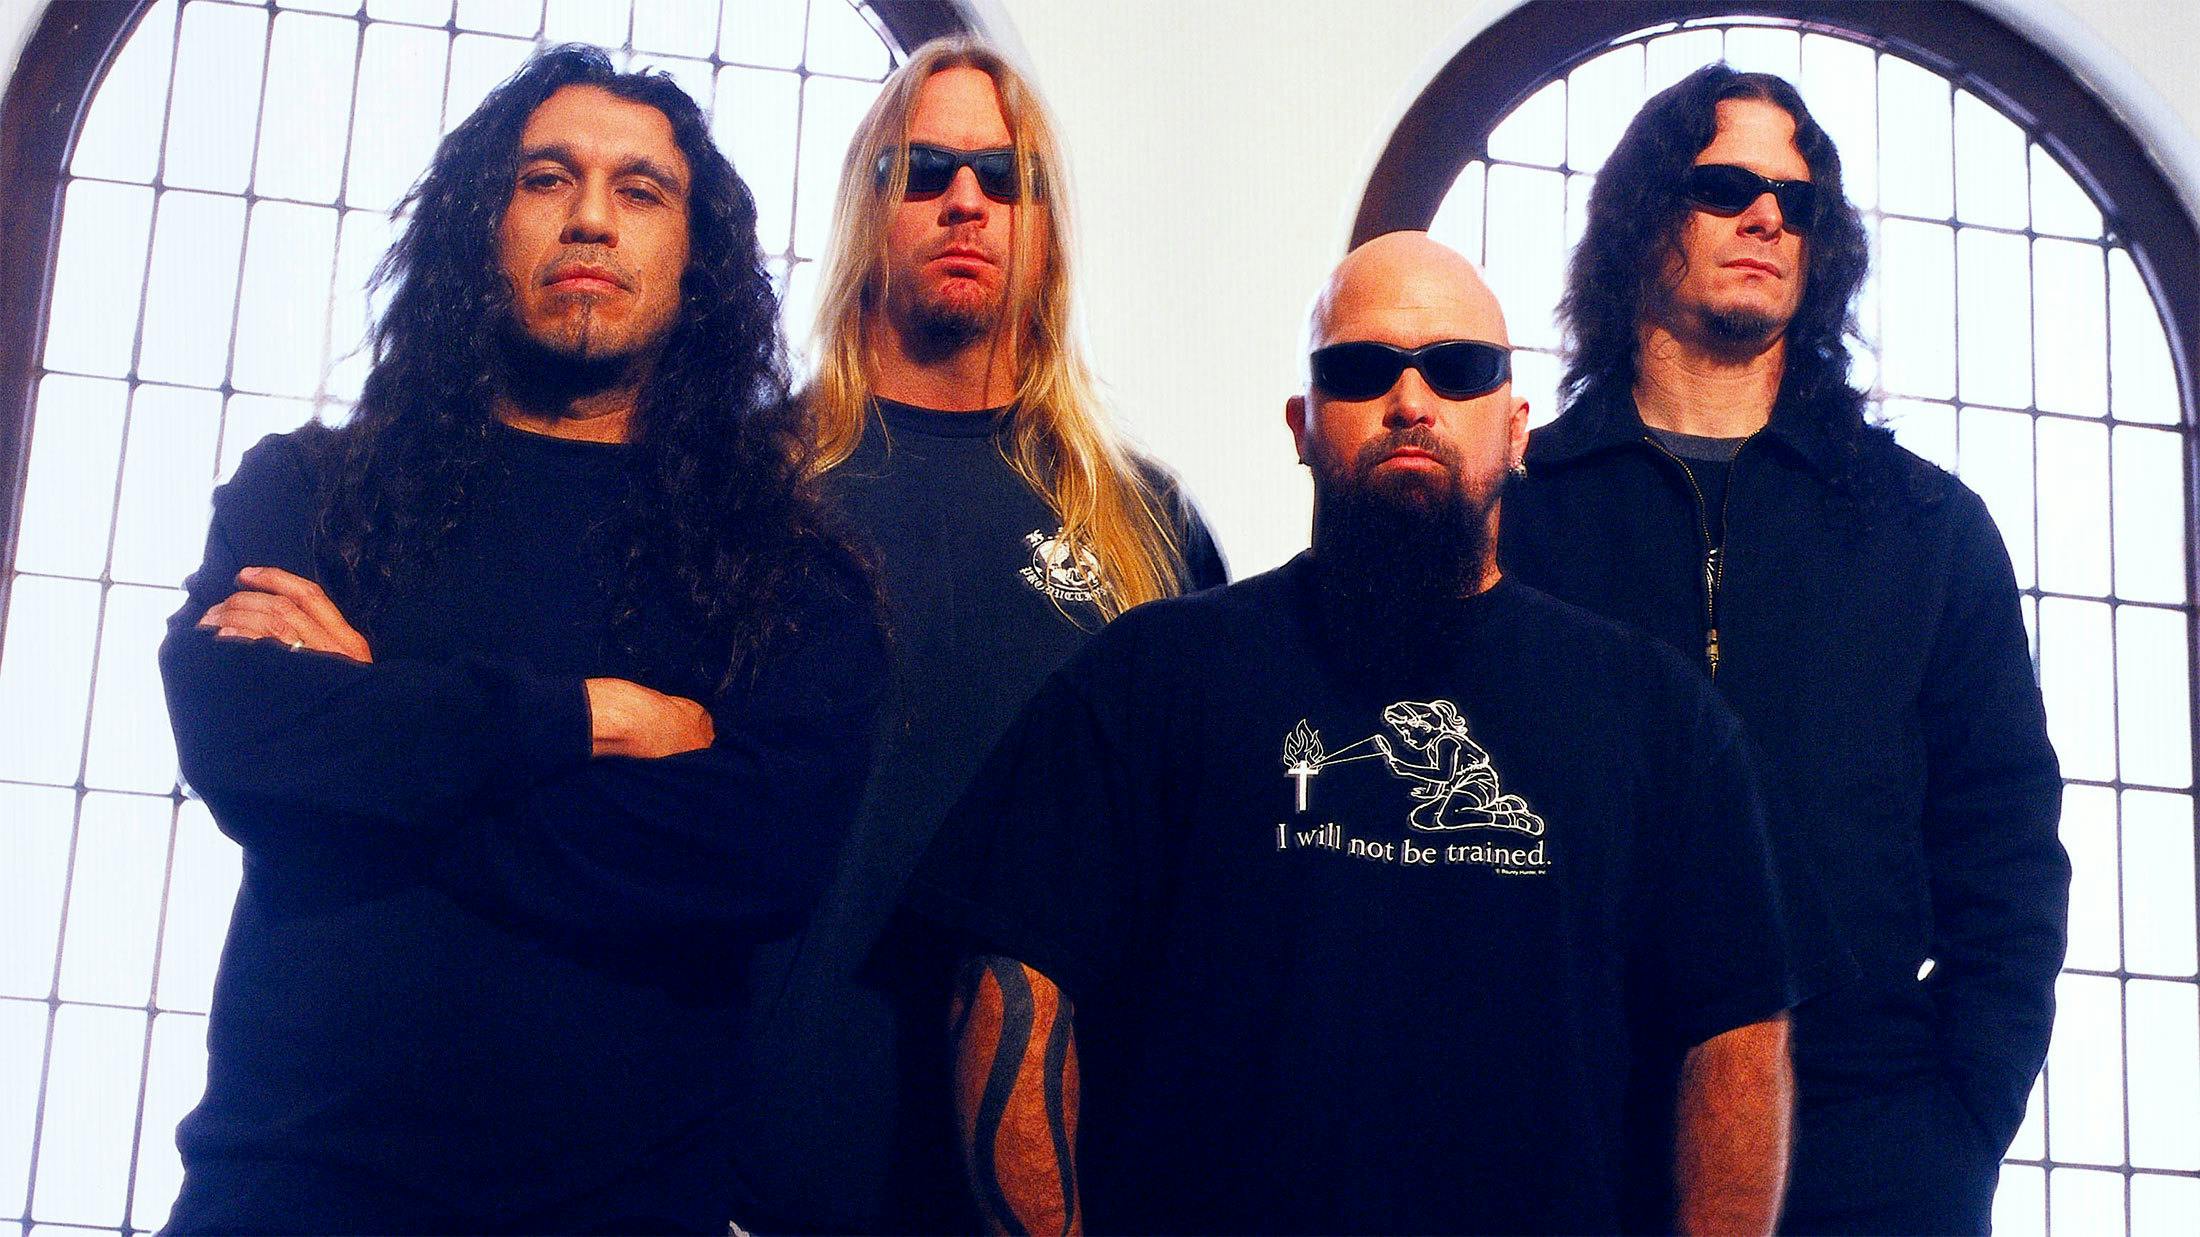 How God Hates Us All made Slayer great again